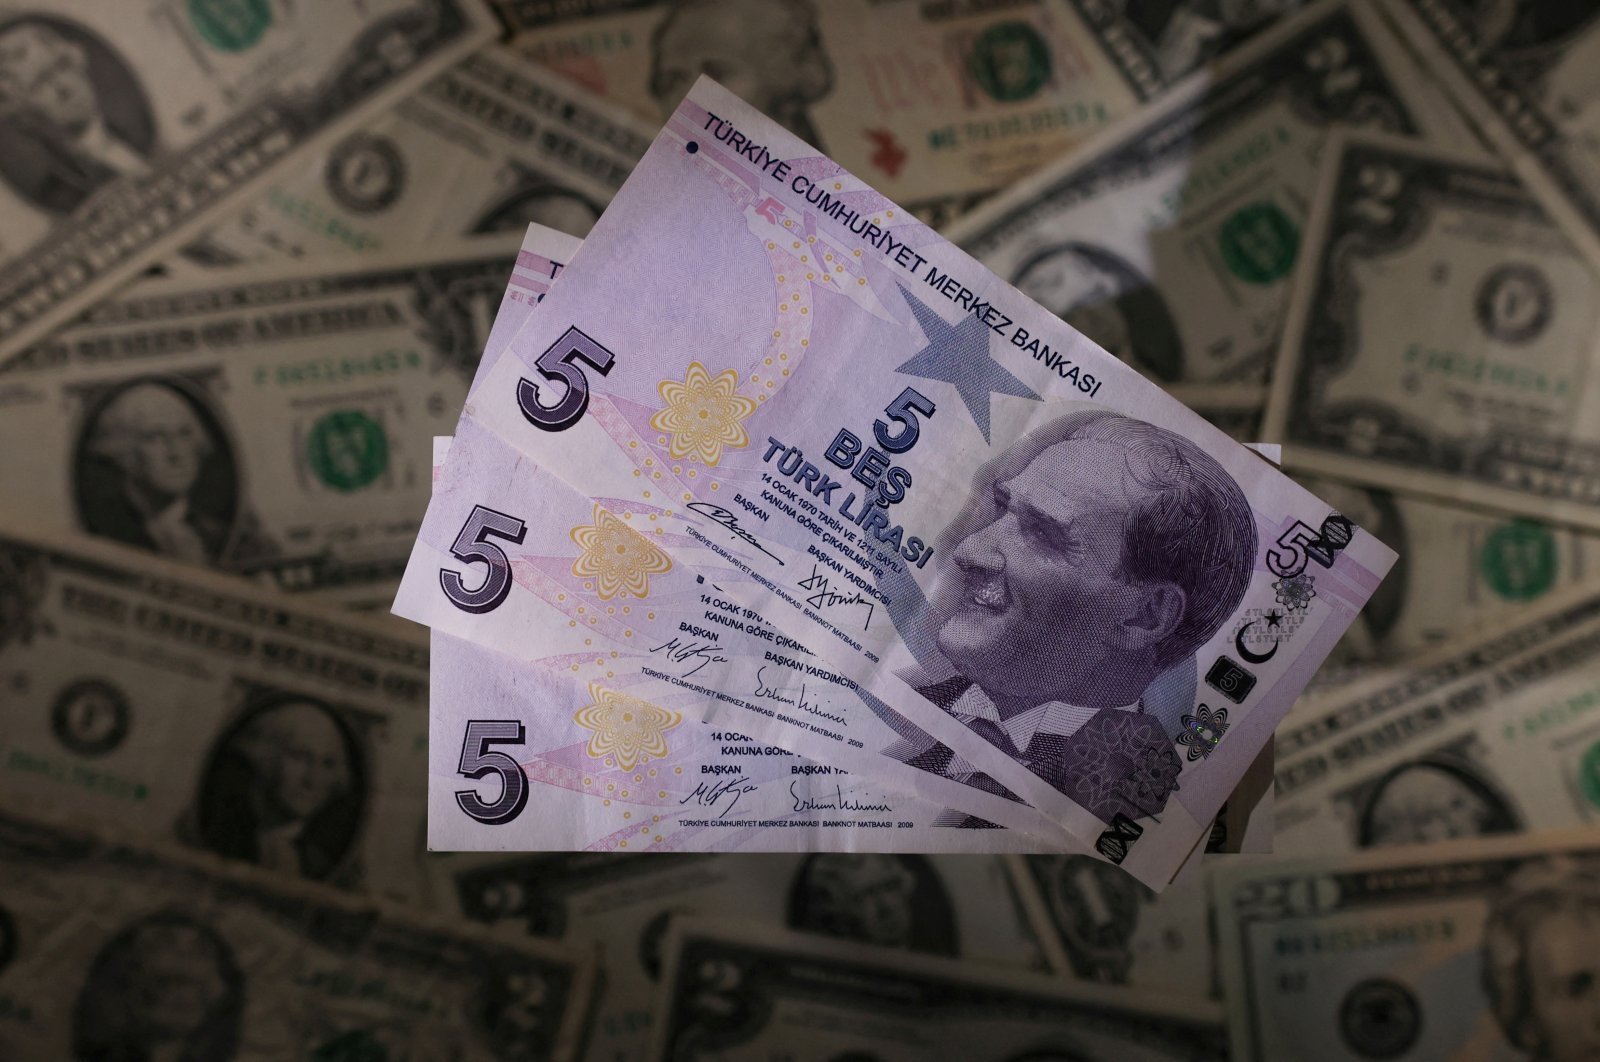 Turkish lira banknotes are seen placed on U.S. dollar banknotes in this illustration created on Nov. 28, 2021. (Reuters Photo)